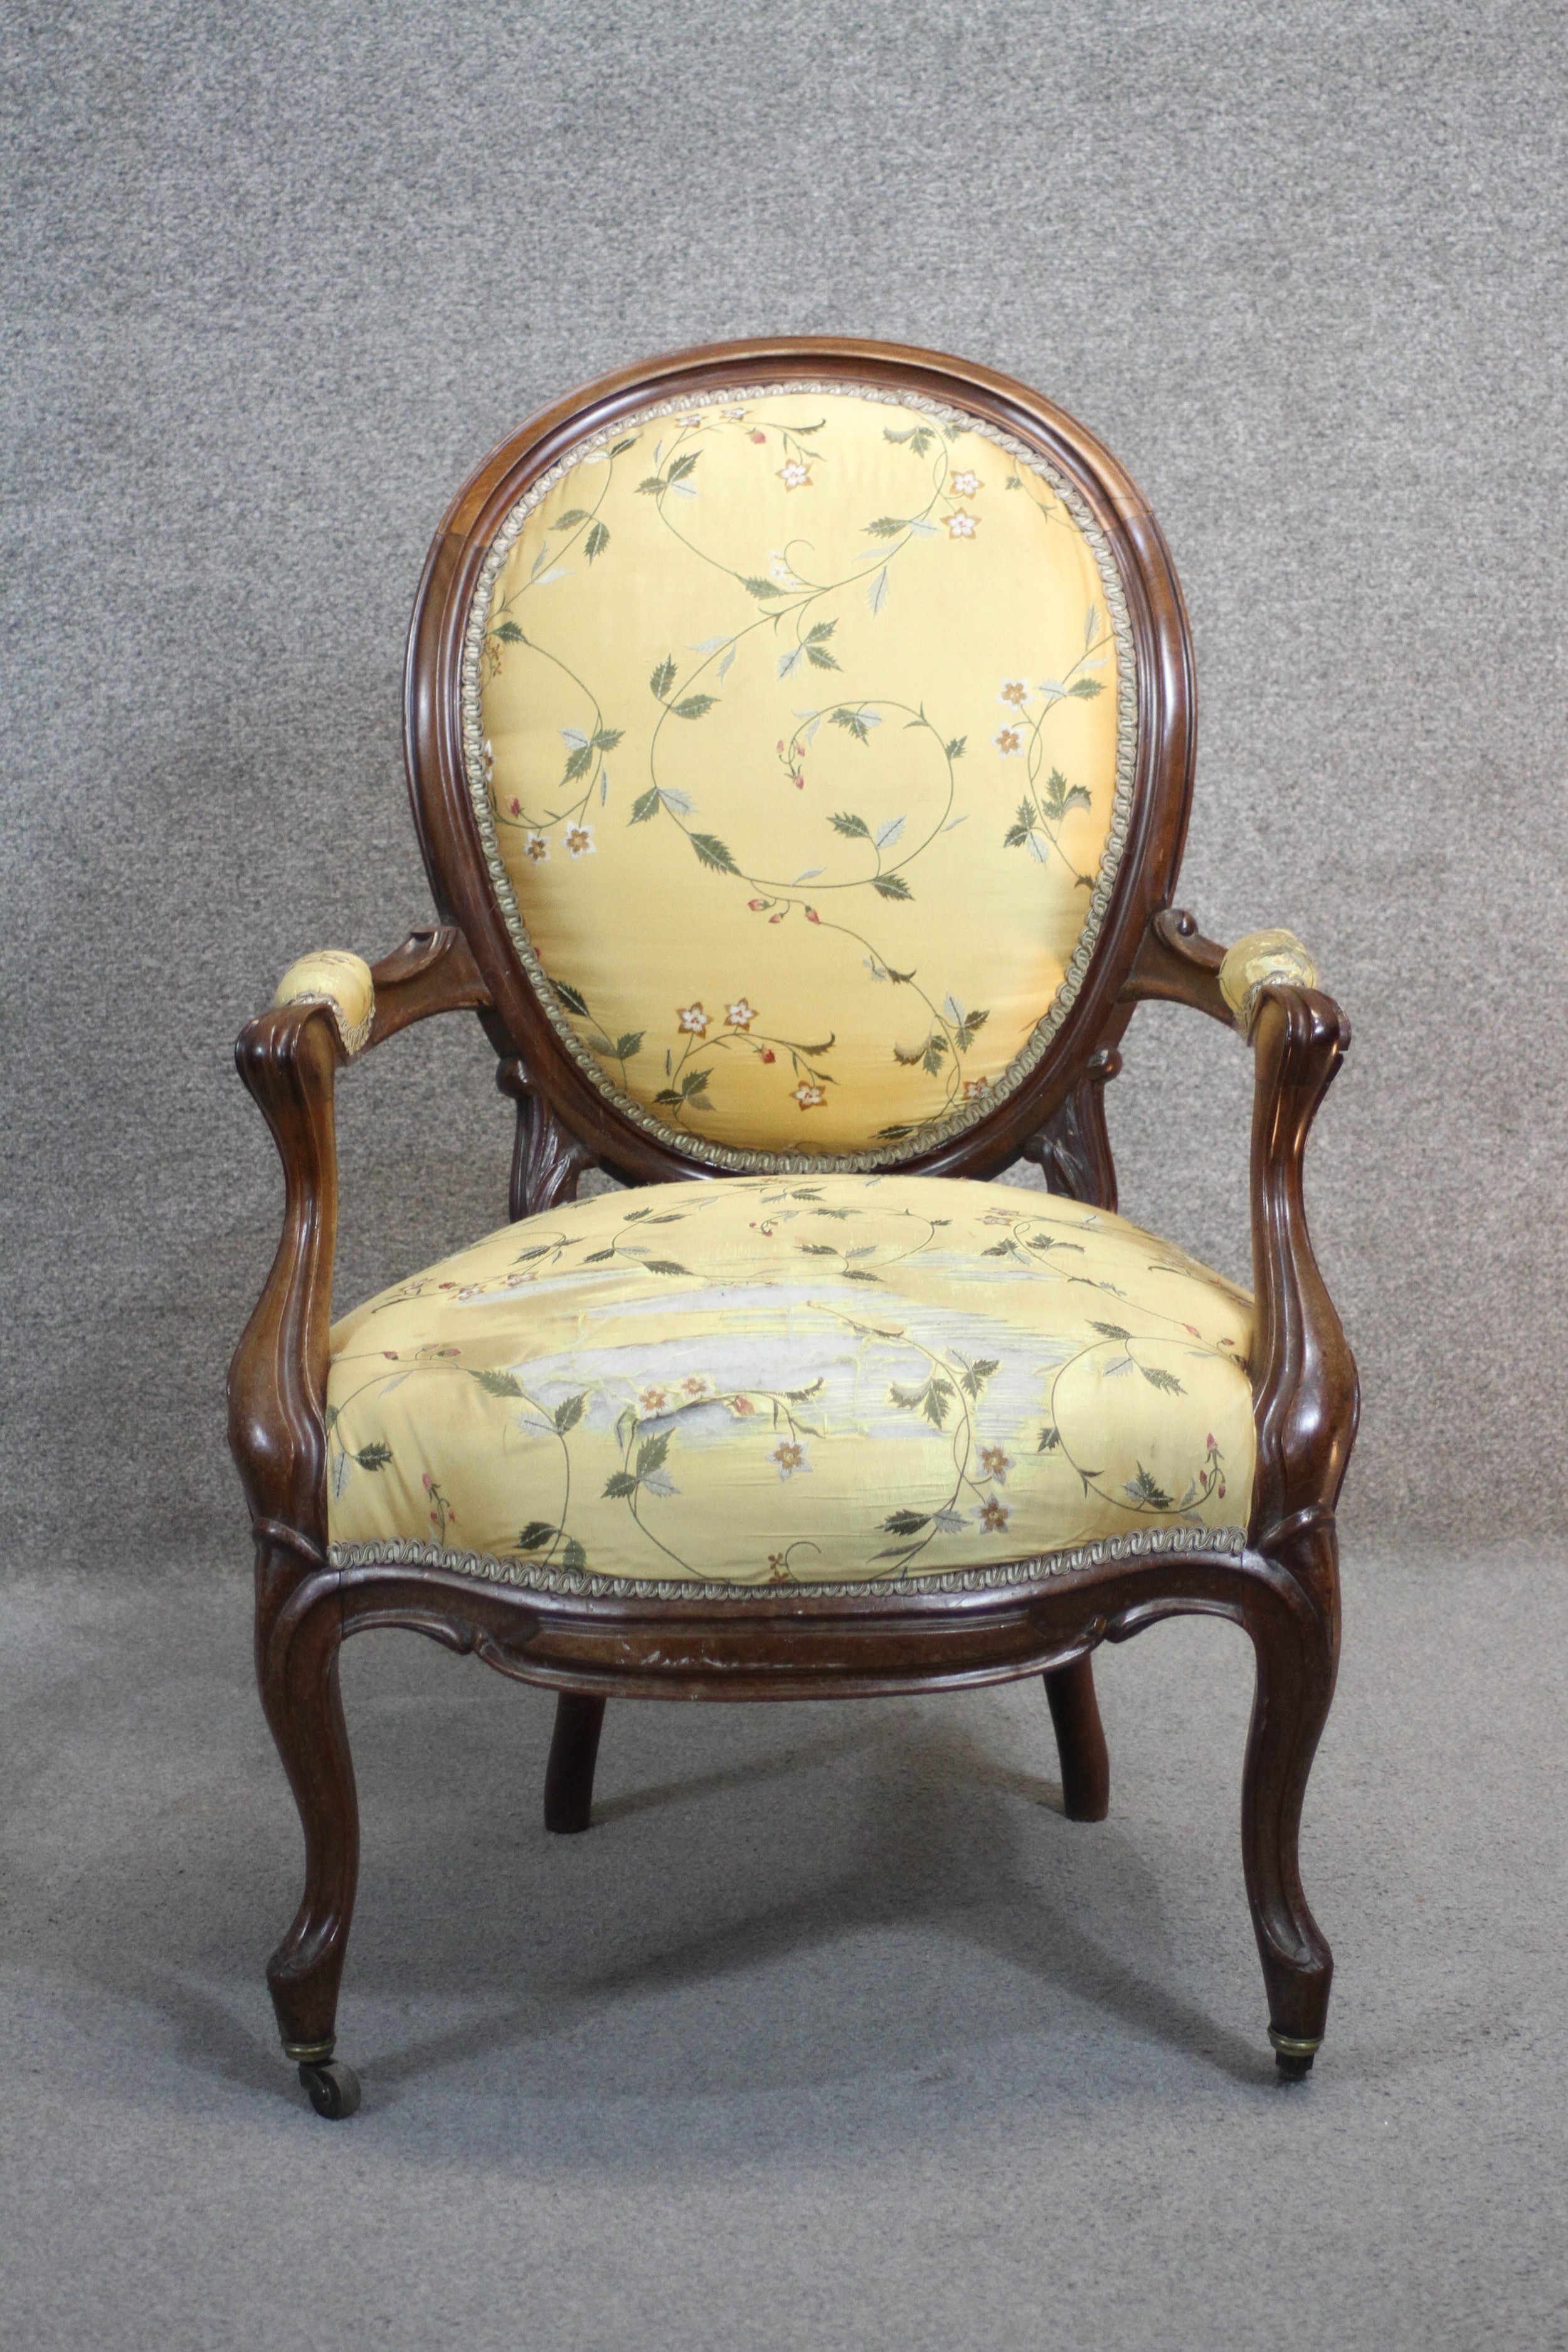 A 19th century mahogany framed French style armchair in floral silk upholstery raised on cabriole